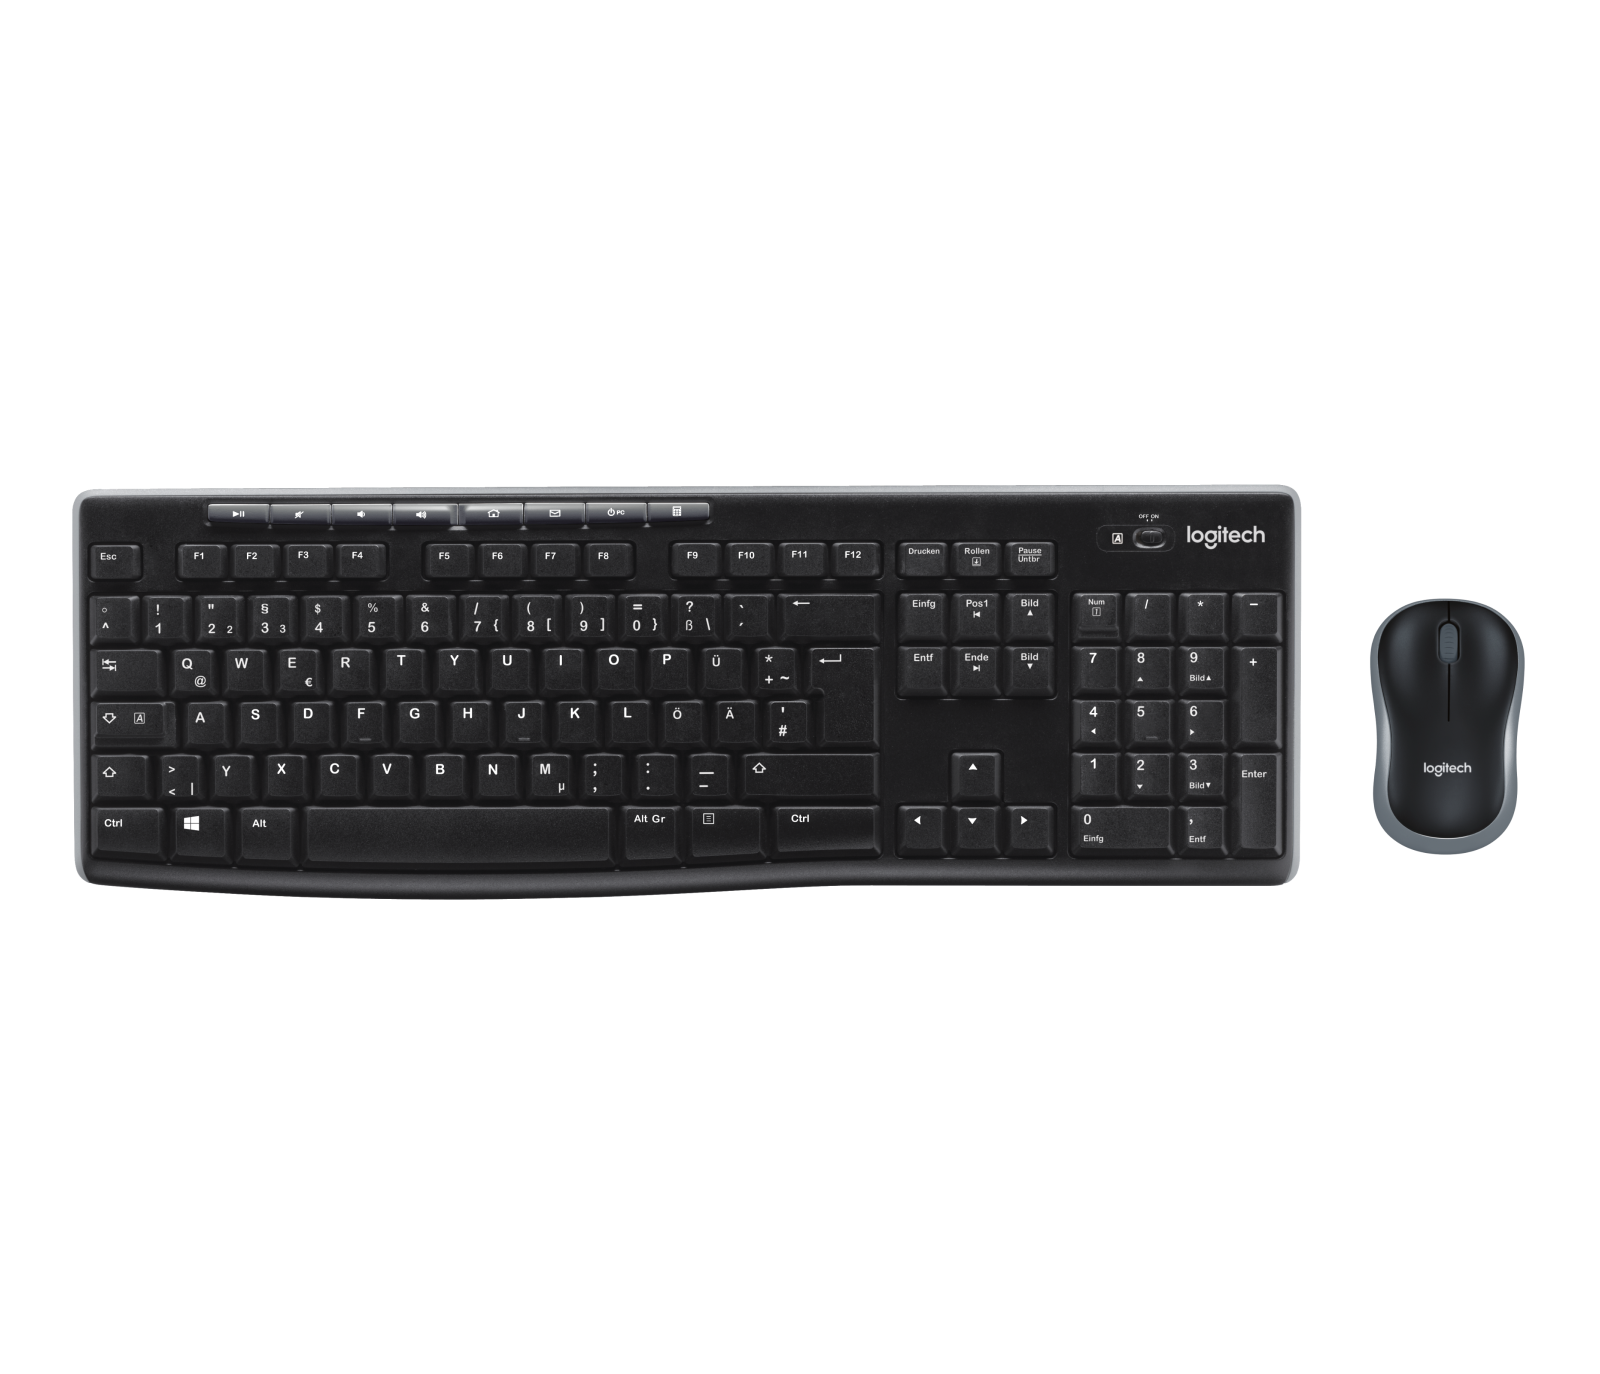 & Logitech MK270 Wireless Keyboard and Mouse Combo VH240a, Black Keyboard and Mouse Included HP 23.8-inch FHD IPS Monitor with Tilt/Height Adjustment and Built-in Speakers 